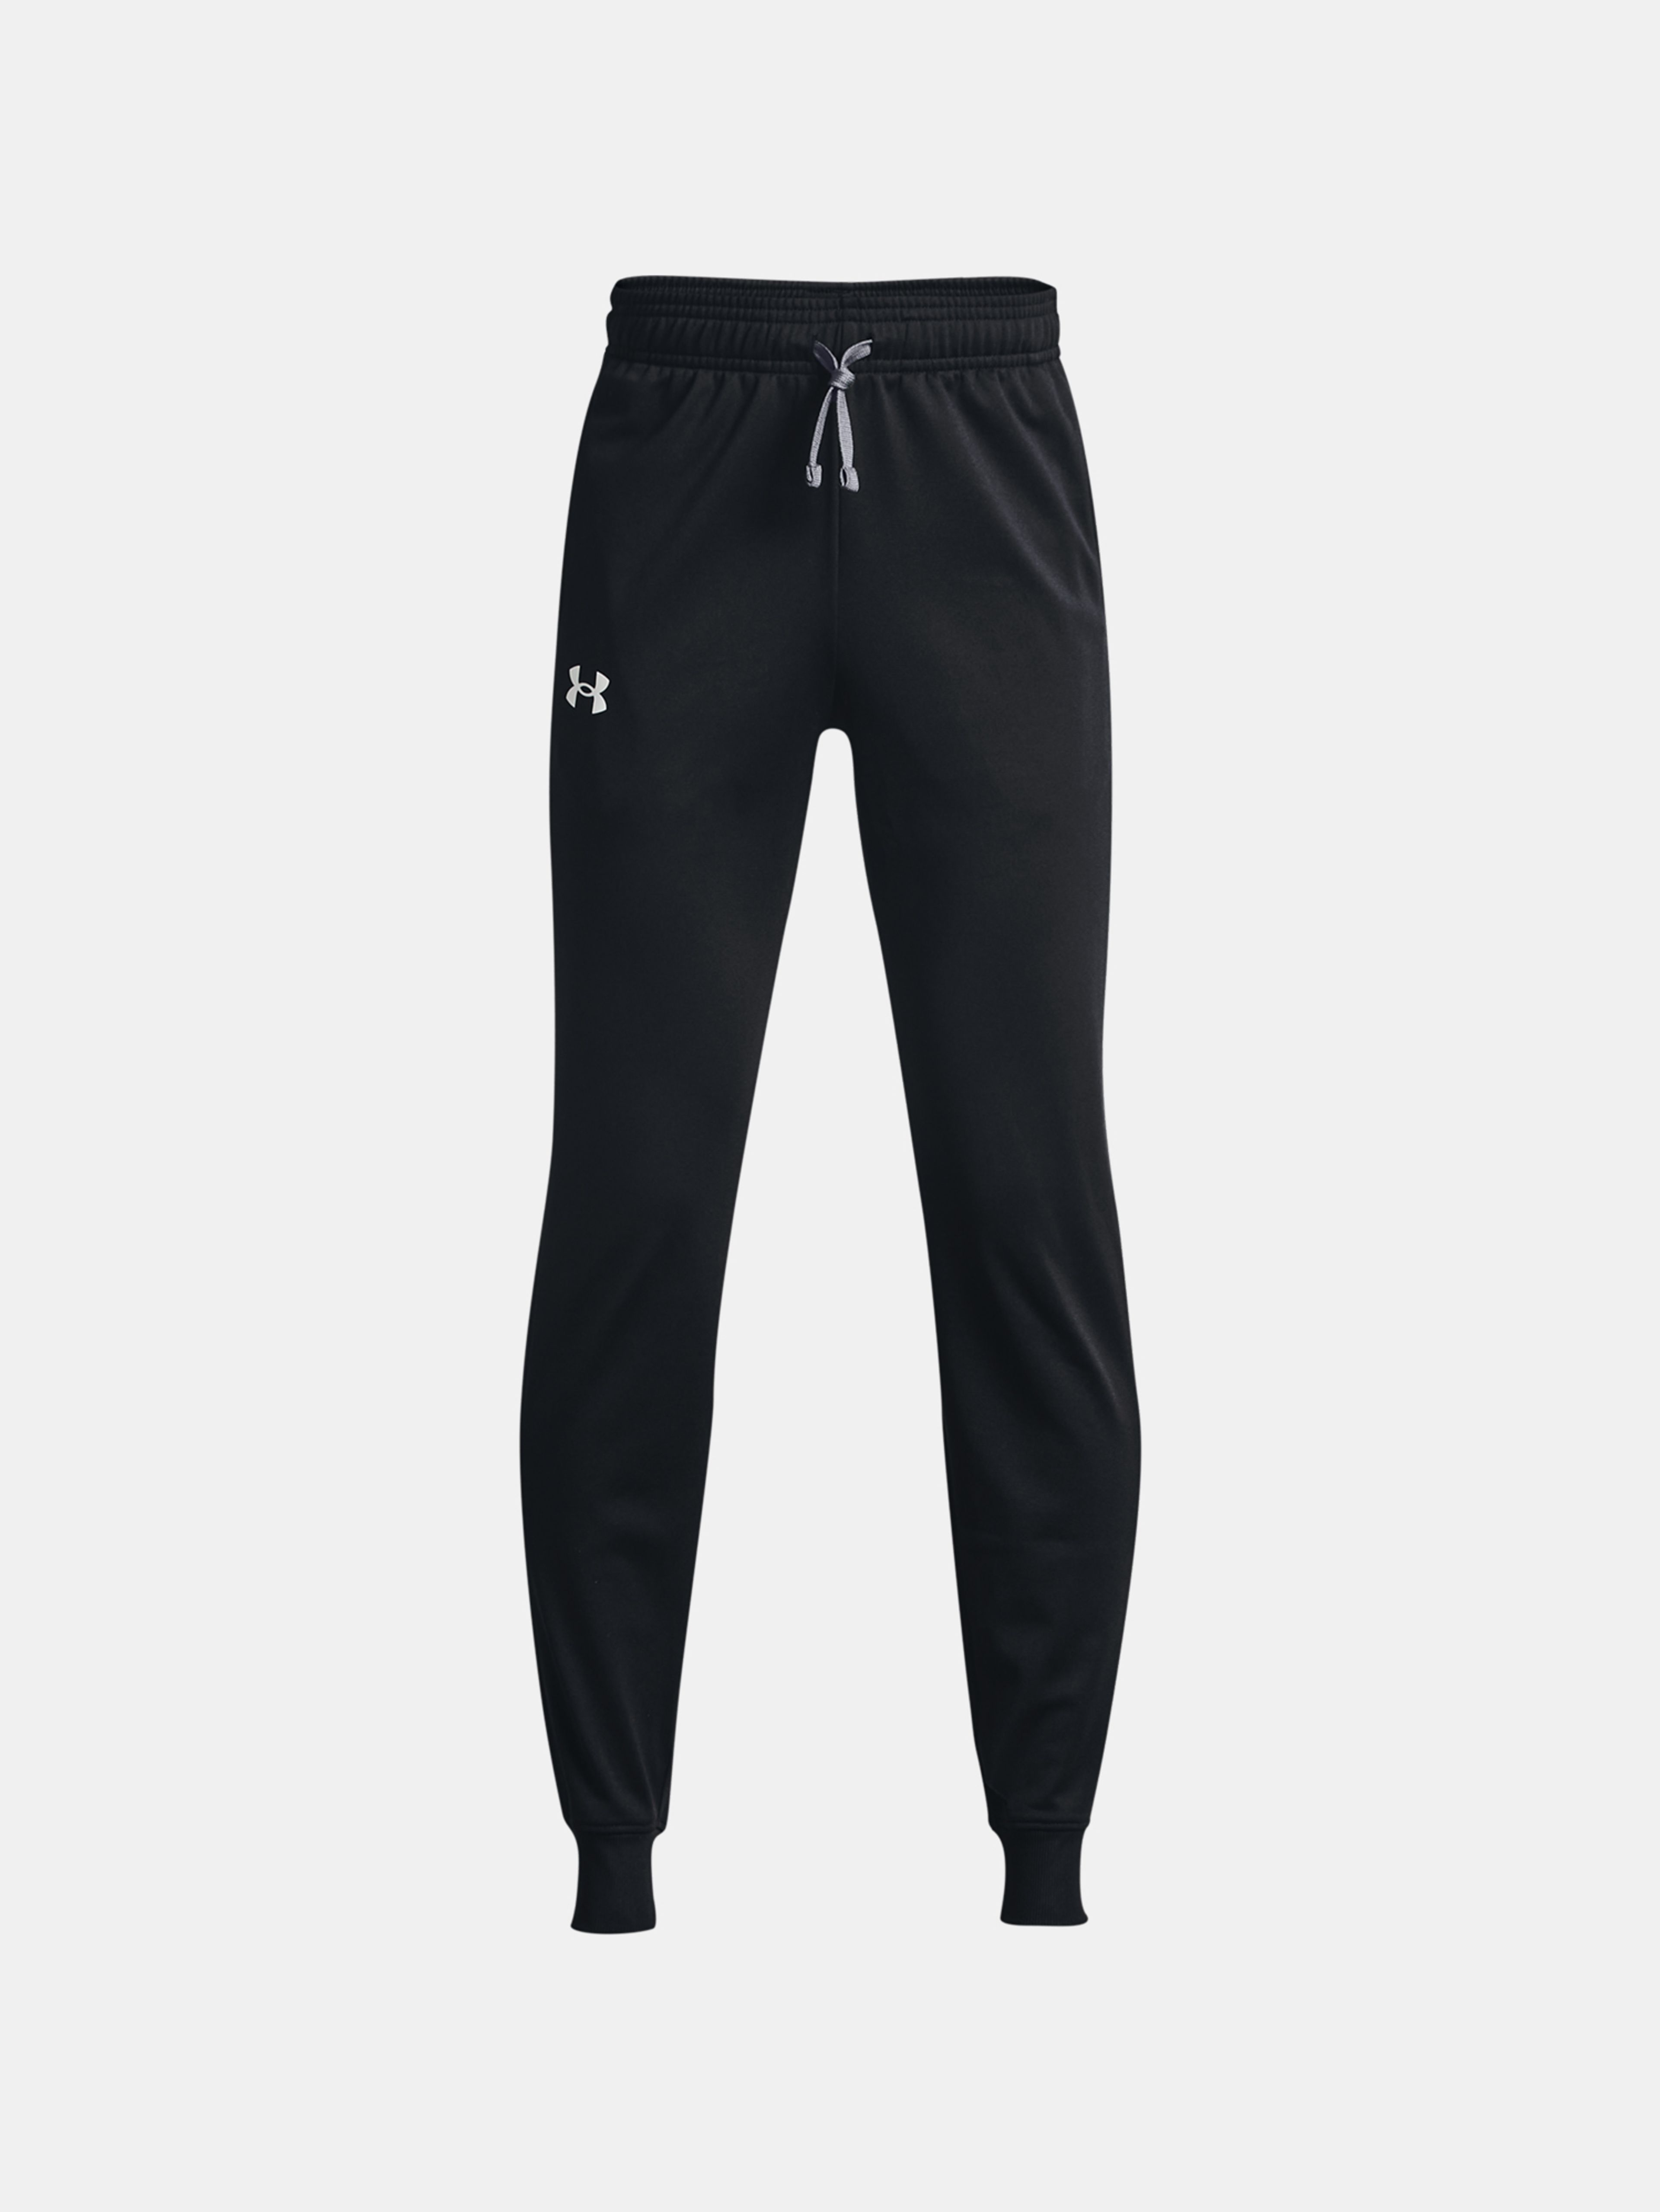 Nohavice Under Armour UA BRAWLER 2.0 TAPERED PANTS-BLK